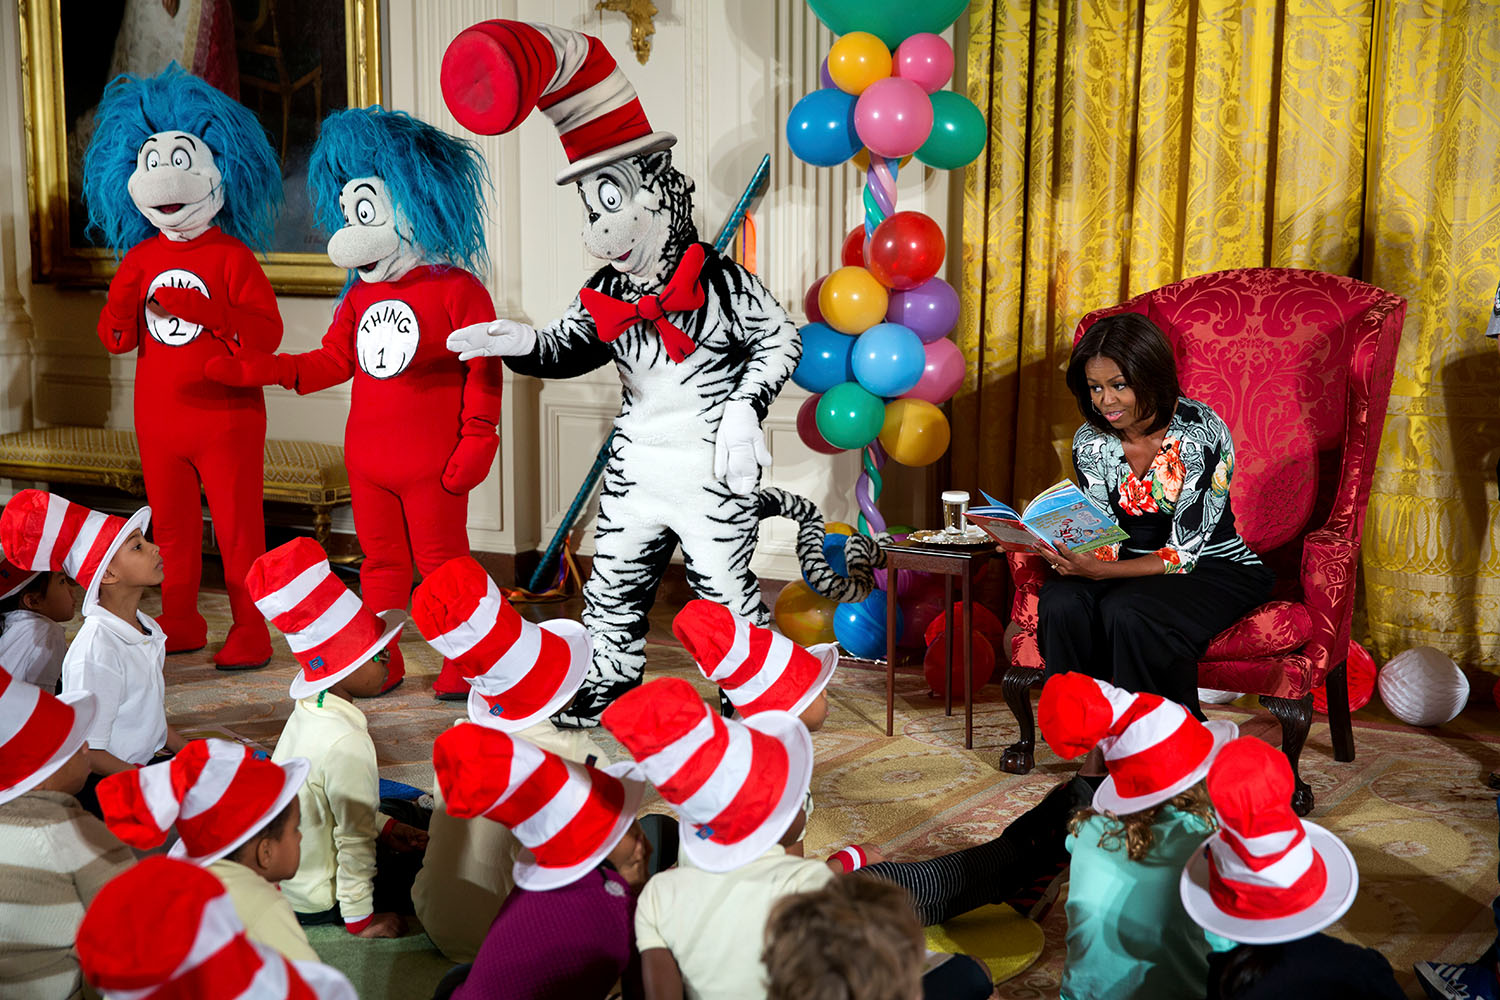 First Lady reads Green Eggs and Ham - NAI: 157649364